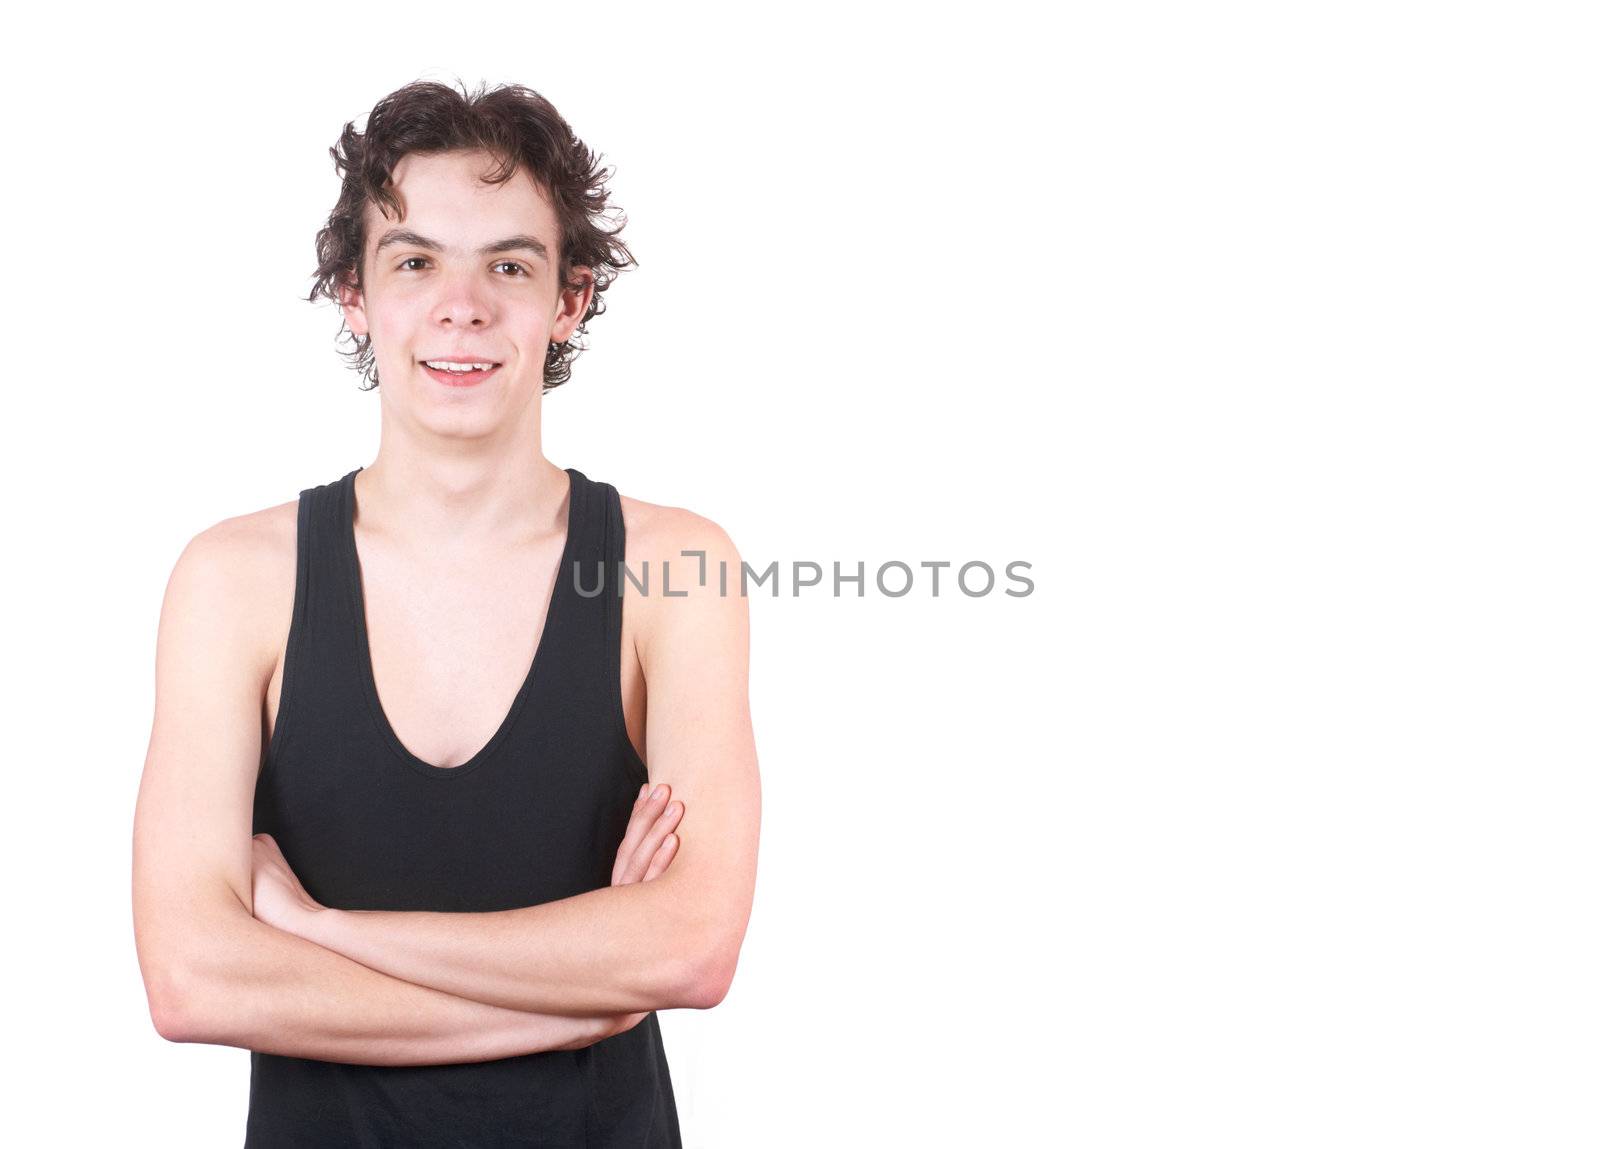 The cheerful boy on a white background